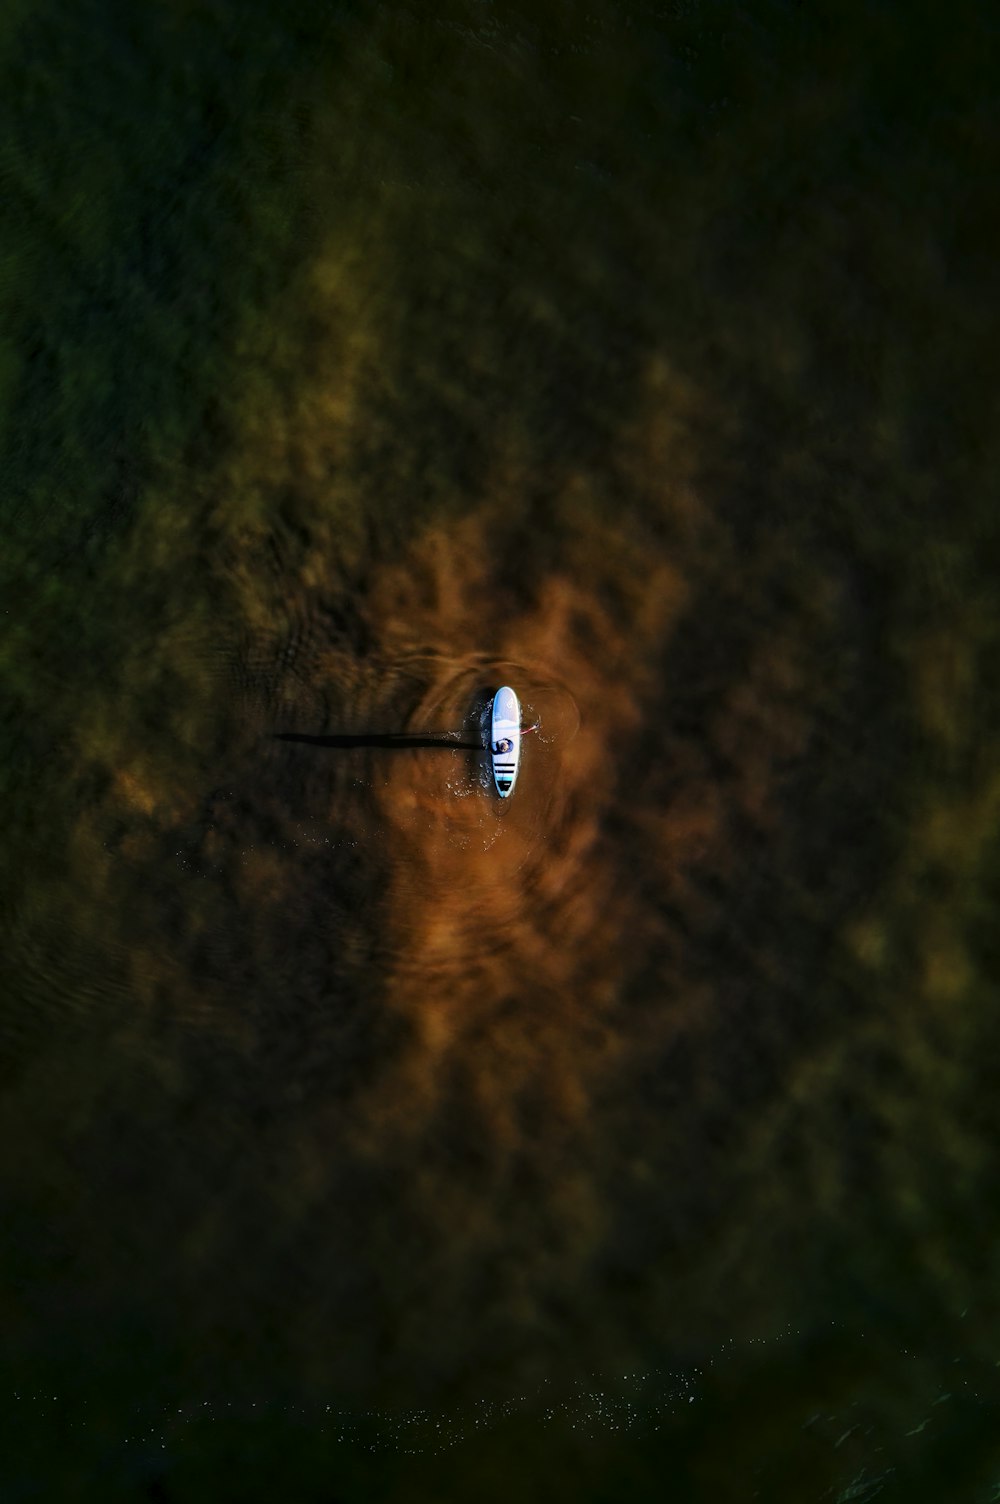 a small boat floating on top of a body of water